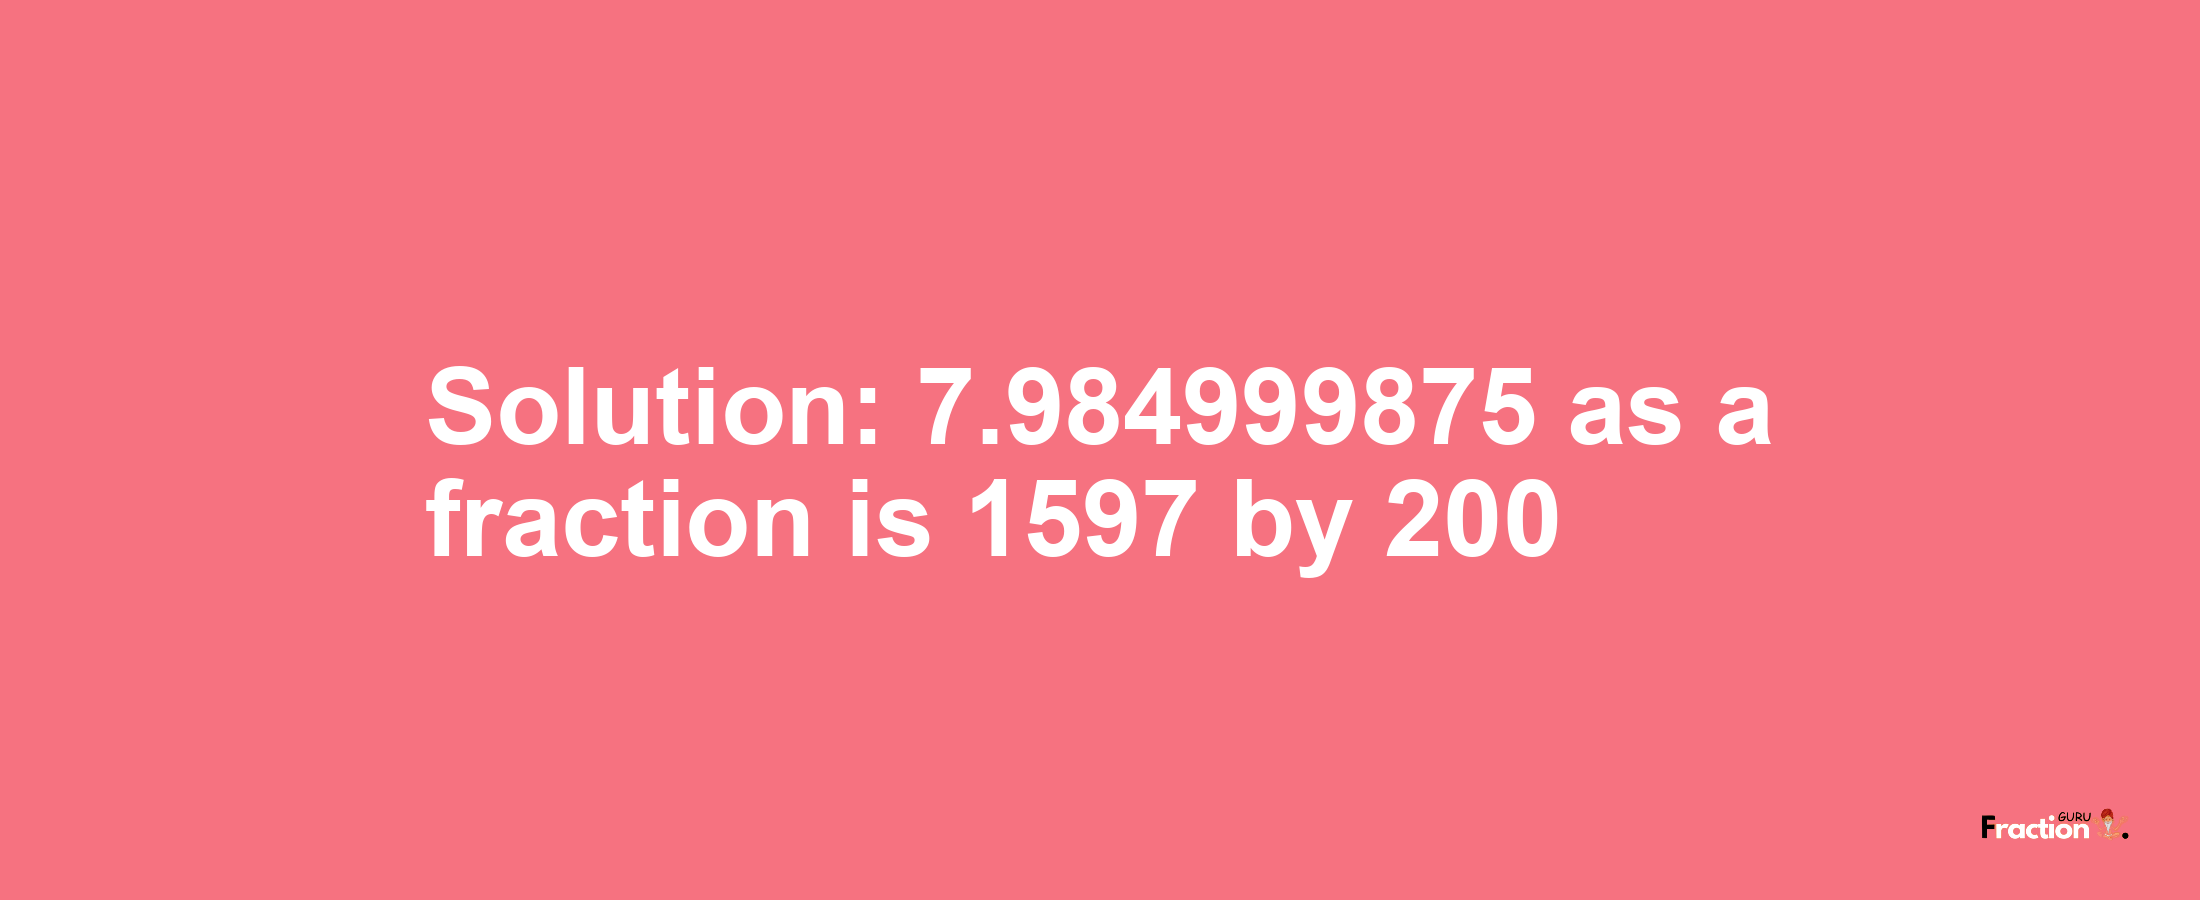 Solution:7.984999875 as a fraction is 1597/200